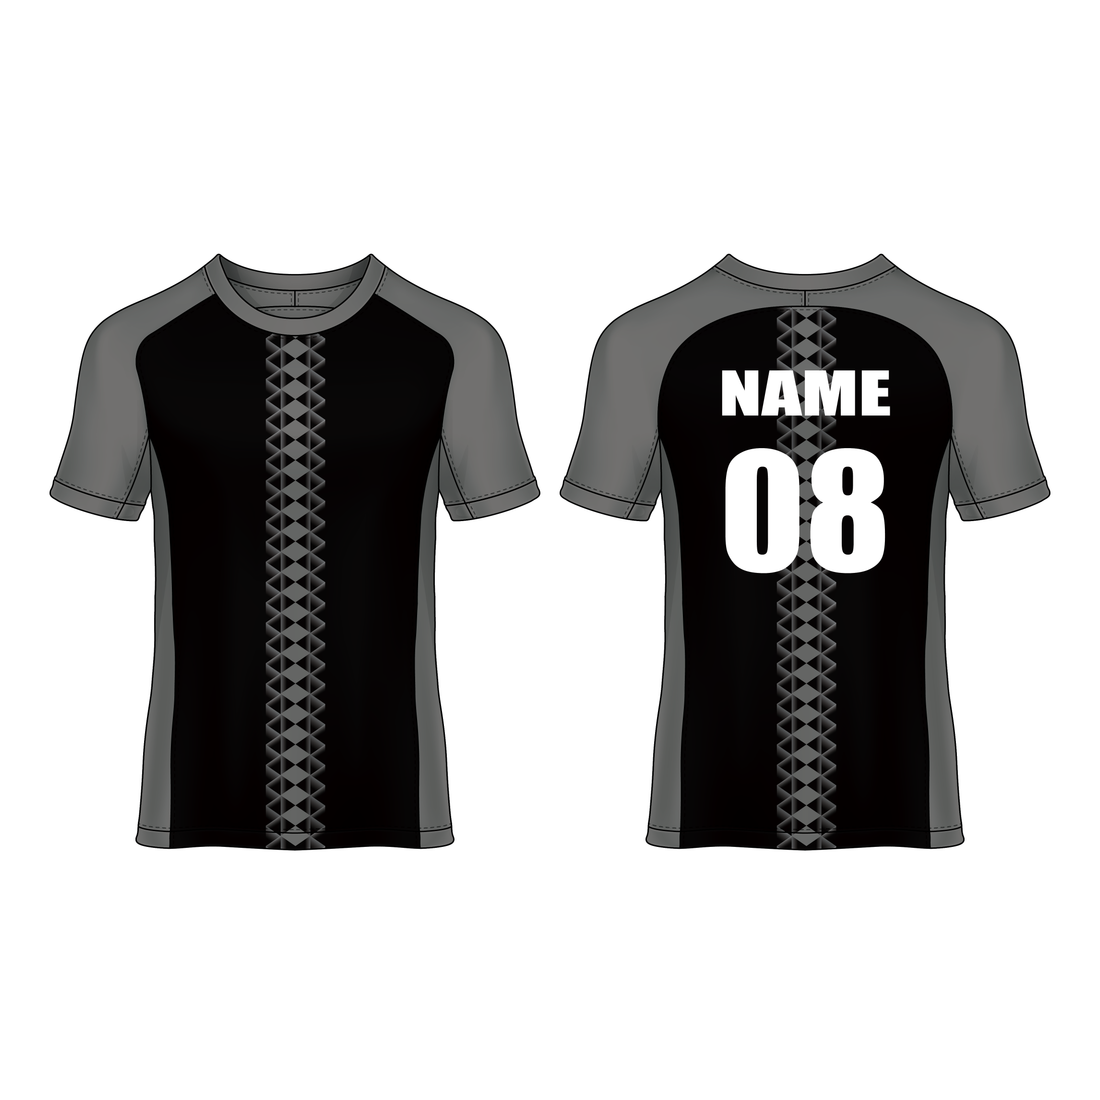 NEXT PRINT All Over Printed Customized Sublimation T-Shirt Unisex Sports Jersey Player Name & Number, Team Name NP50000254